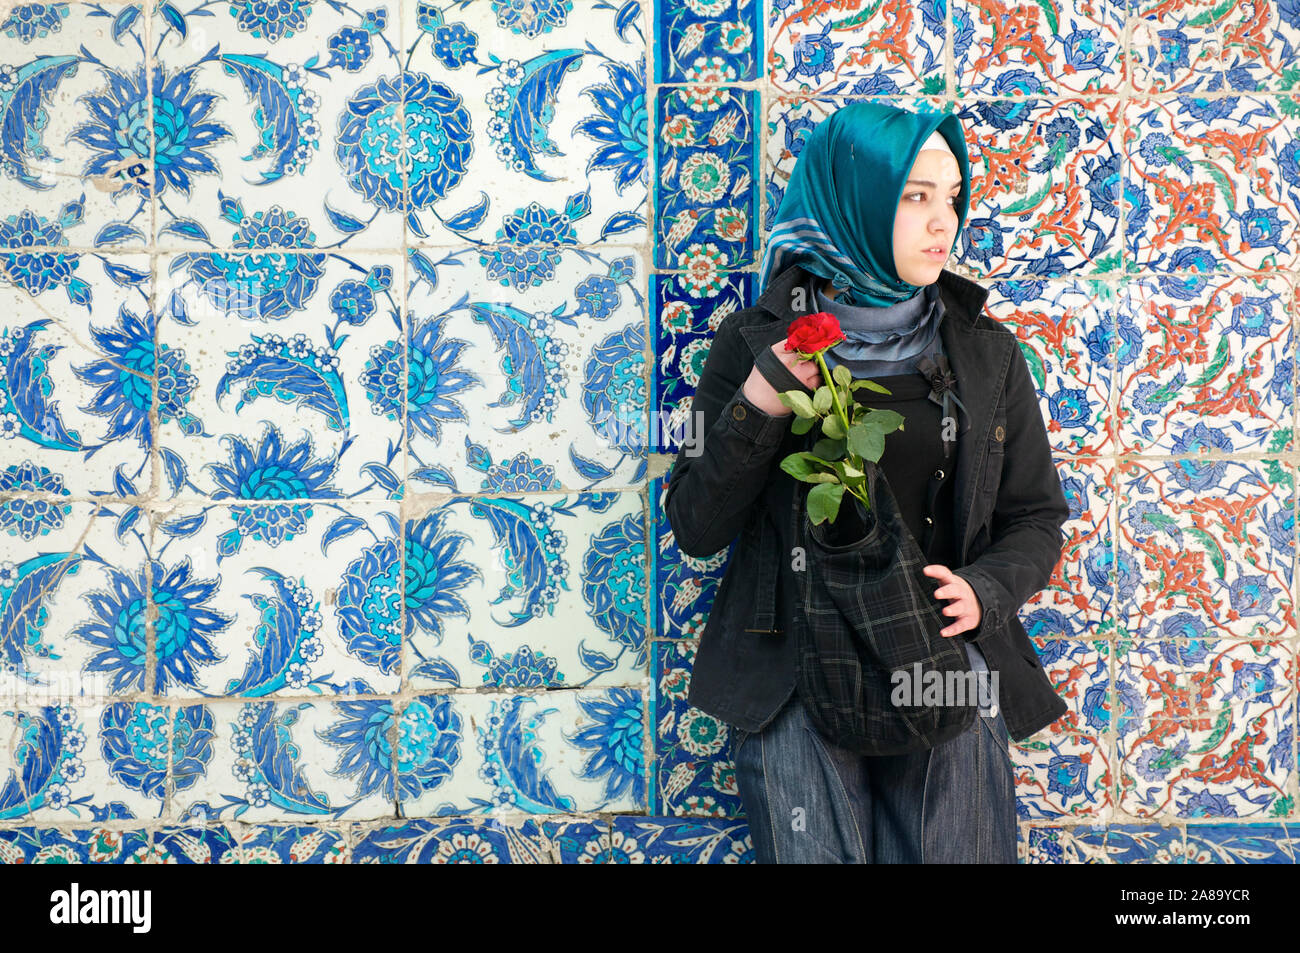 ISTANBUL - MAY 4, 2010: A young Turkish woman in bright headscarf stands holding a red rose against colorful patterned tile background. Stock Photo